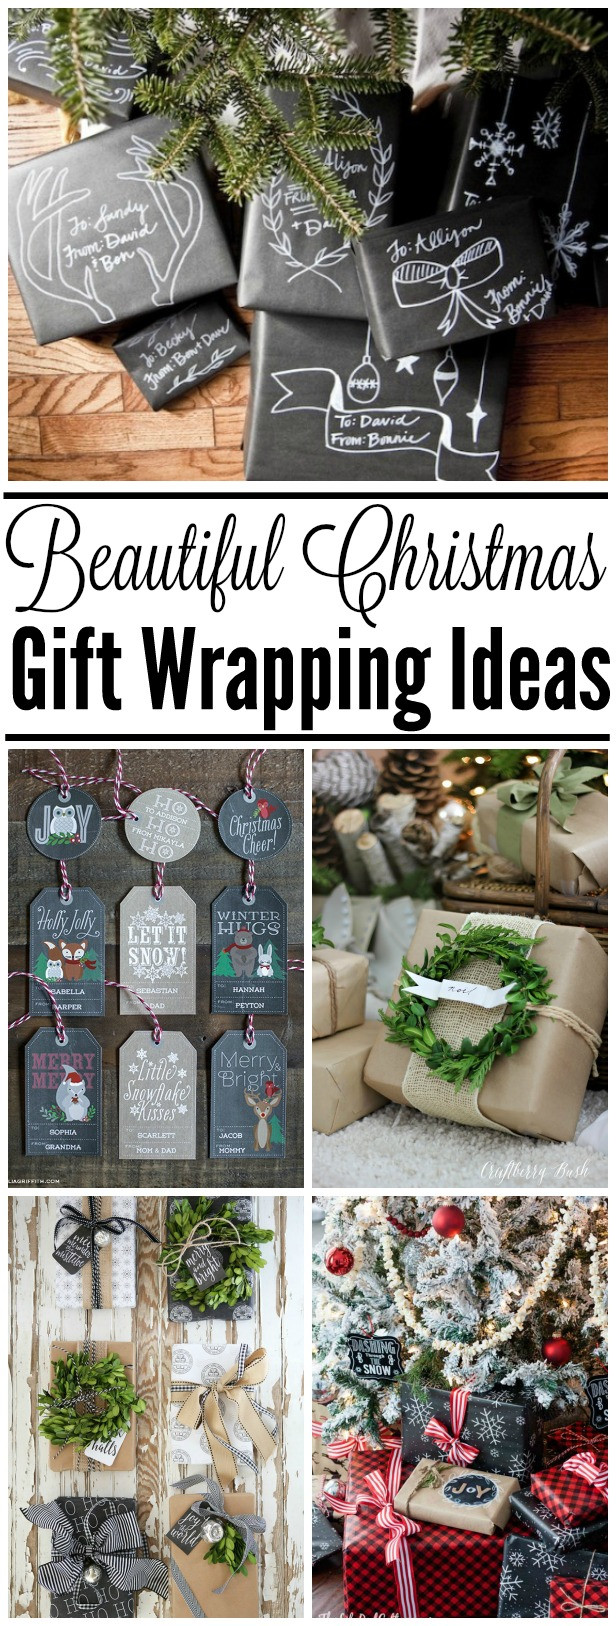 Creative Christmas Gift Ideas
 Creative Christmas Gift Wrapping Ideas Clean and Scentsible